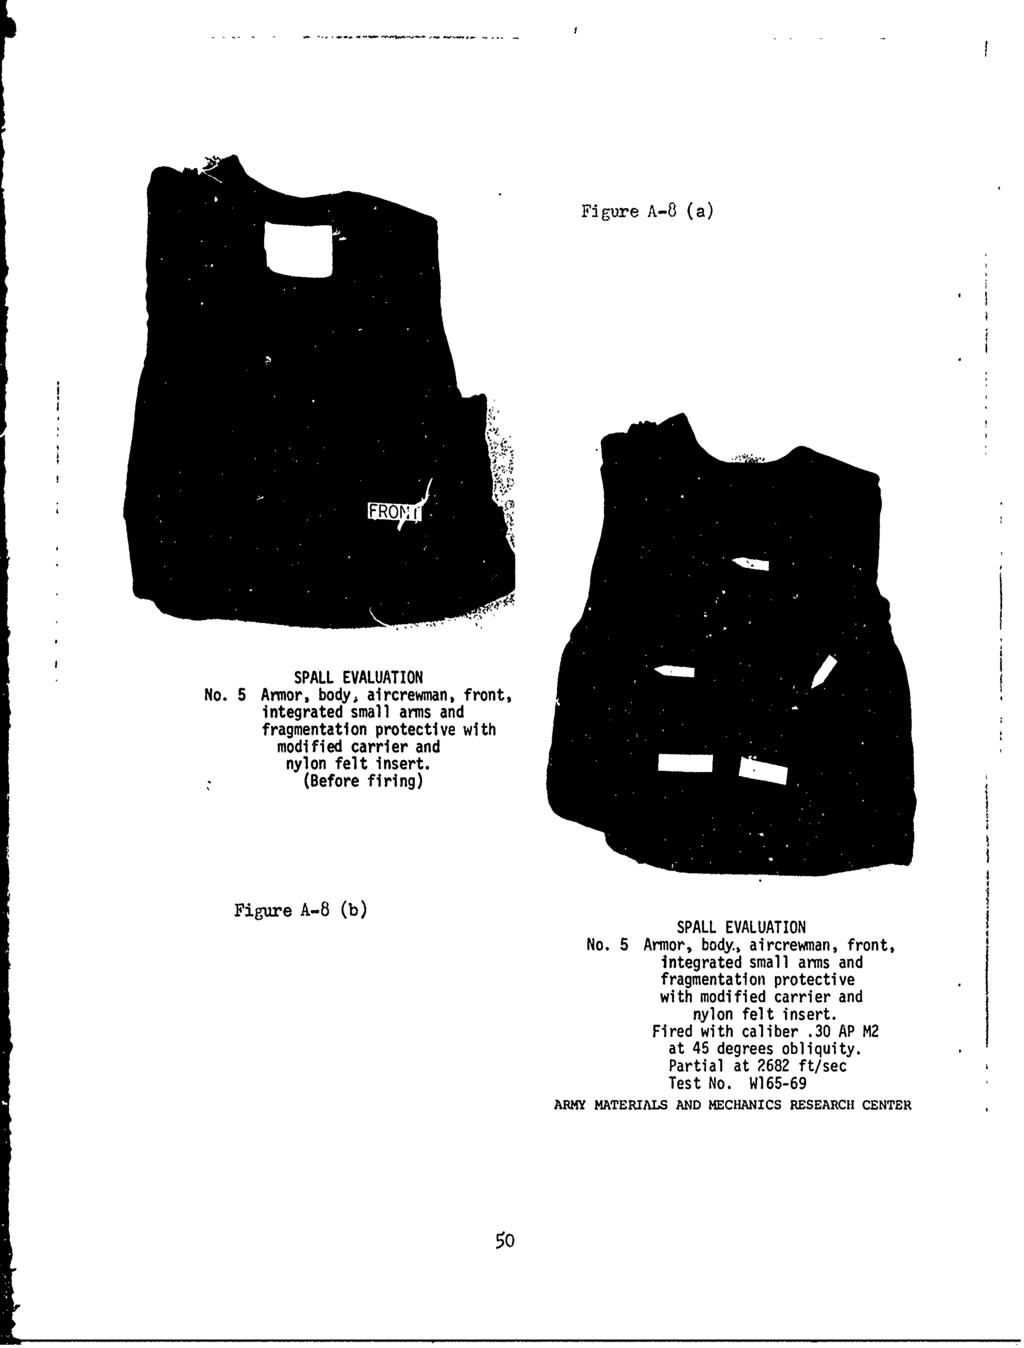 Figure A-8 (a) SPALL EVALUATION No. 5 Armor, body, aircrewman, front, integrated small arms and fragmentation protective with modified carrier and nylon felt insert.